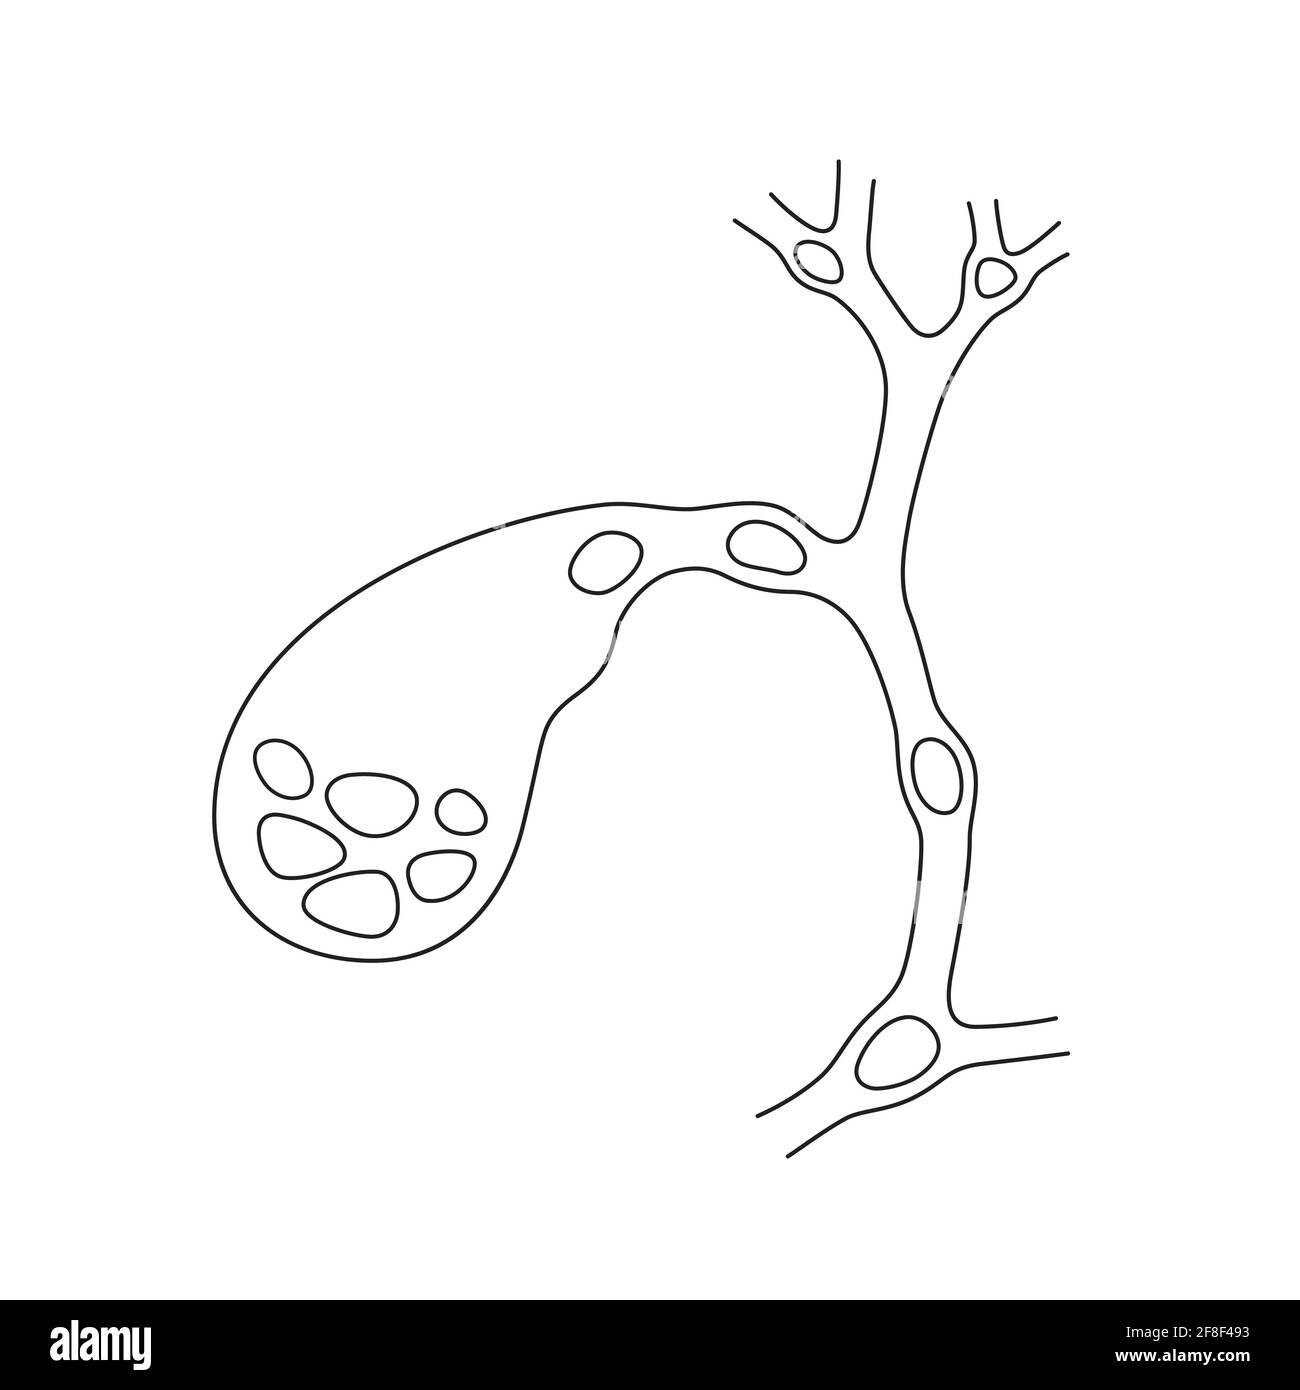 Variants of the location of stones in the gallbladder and bile ducts. Schematic drawing for cholelithiasis, gallstone disease. Stock Vector